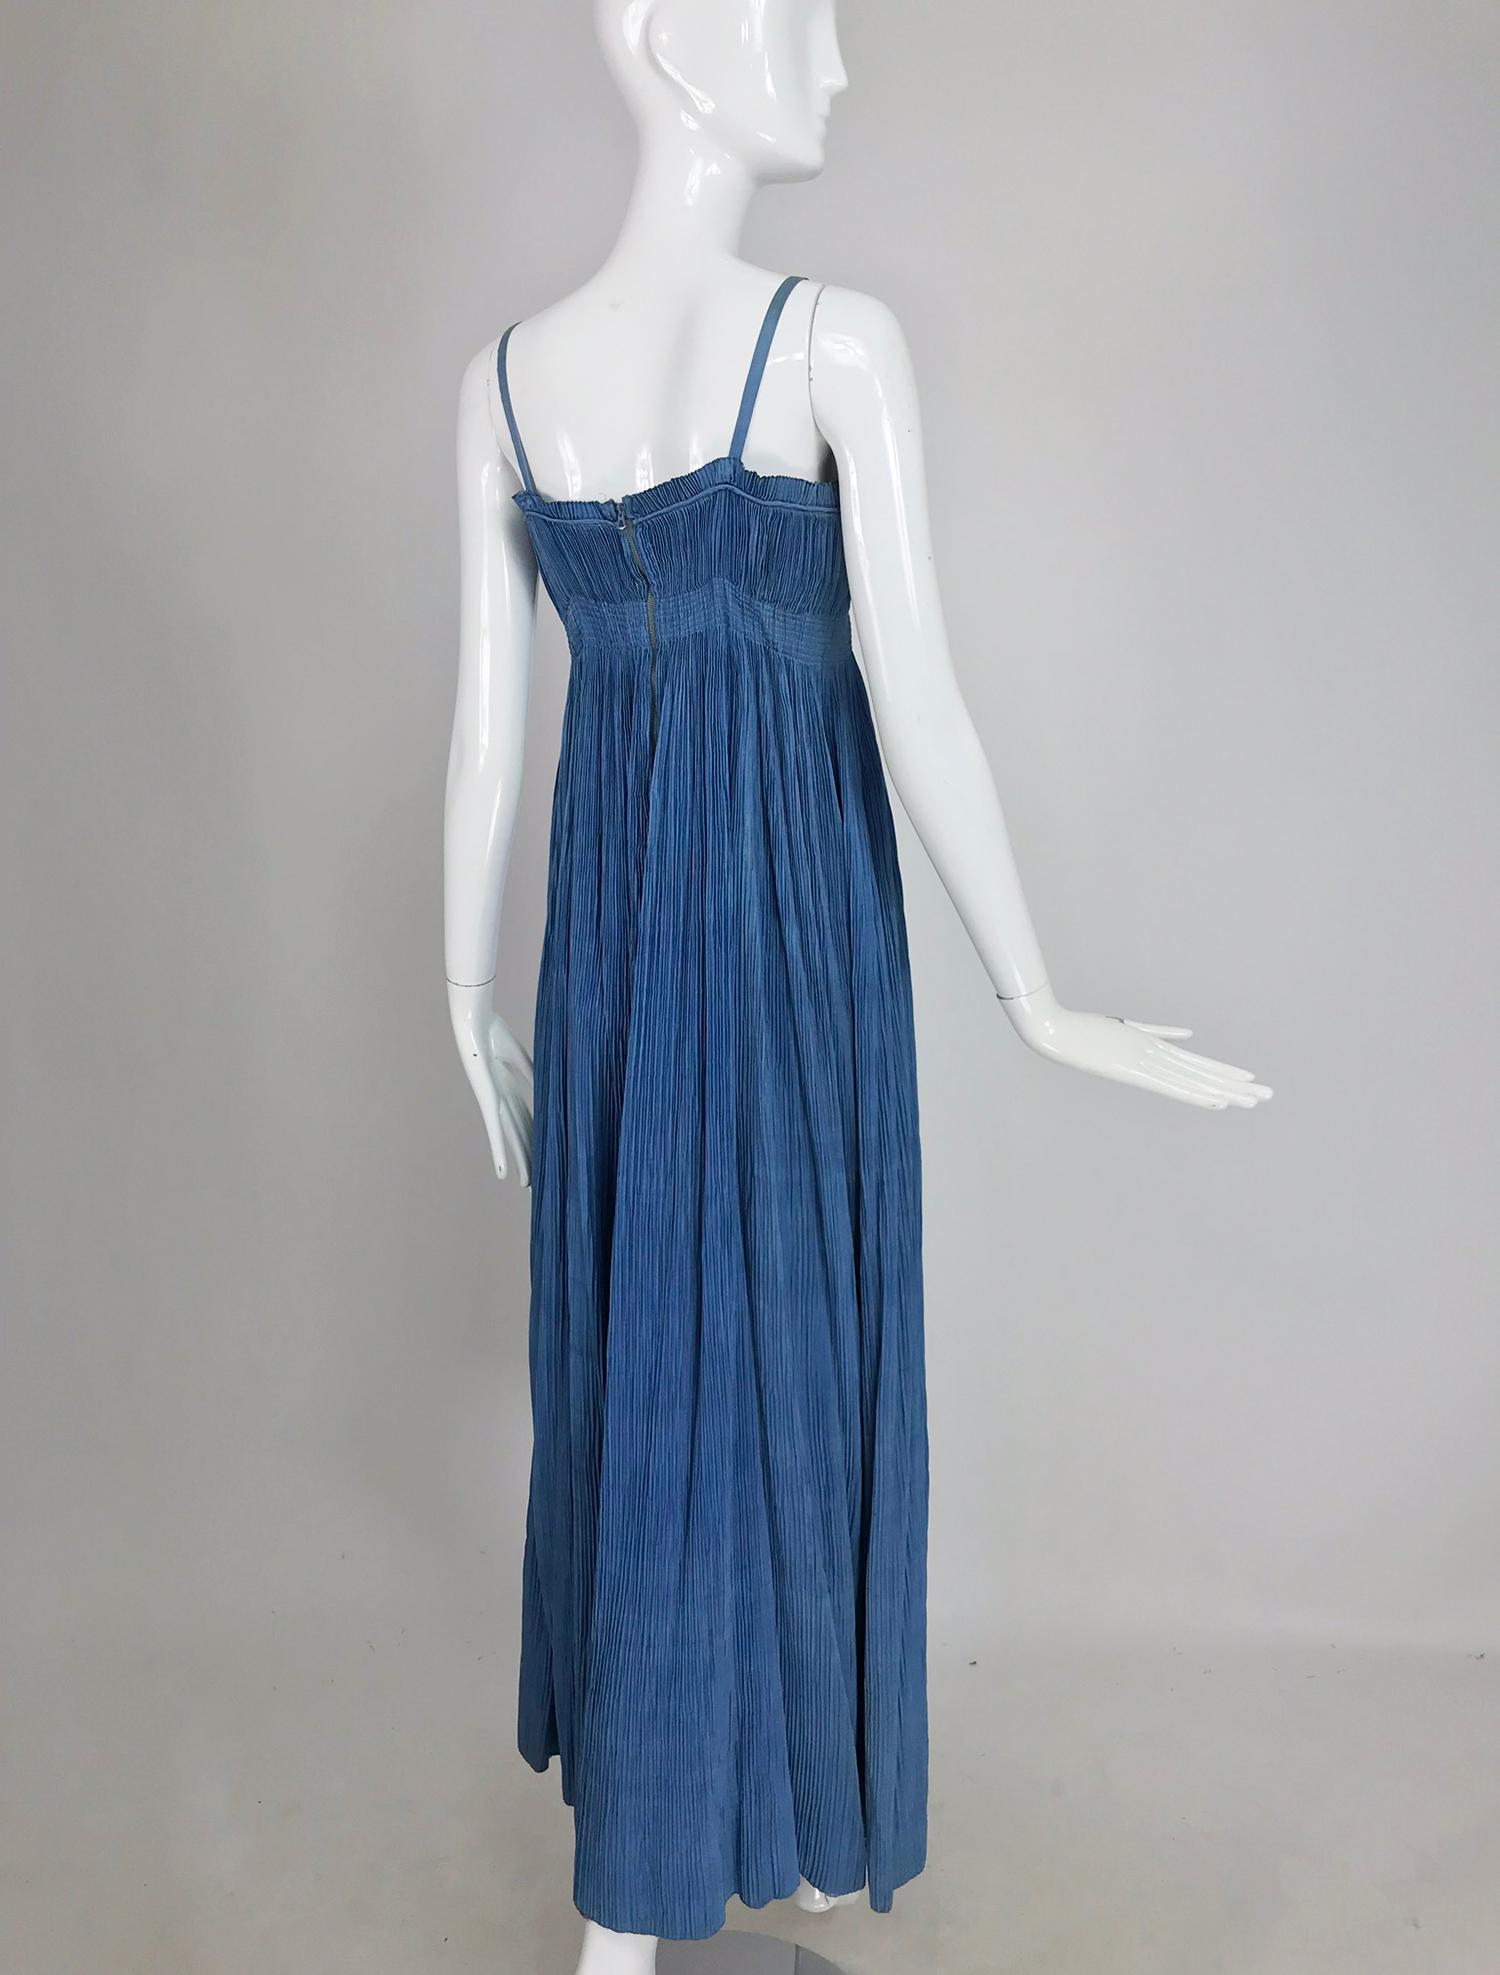 Women's 1930s Blue Pinch Pleated Raw Silk Couture Evening Gown Vintage